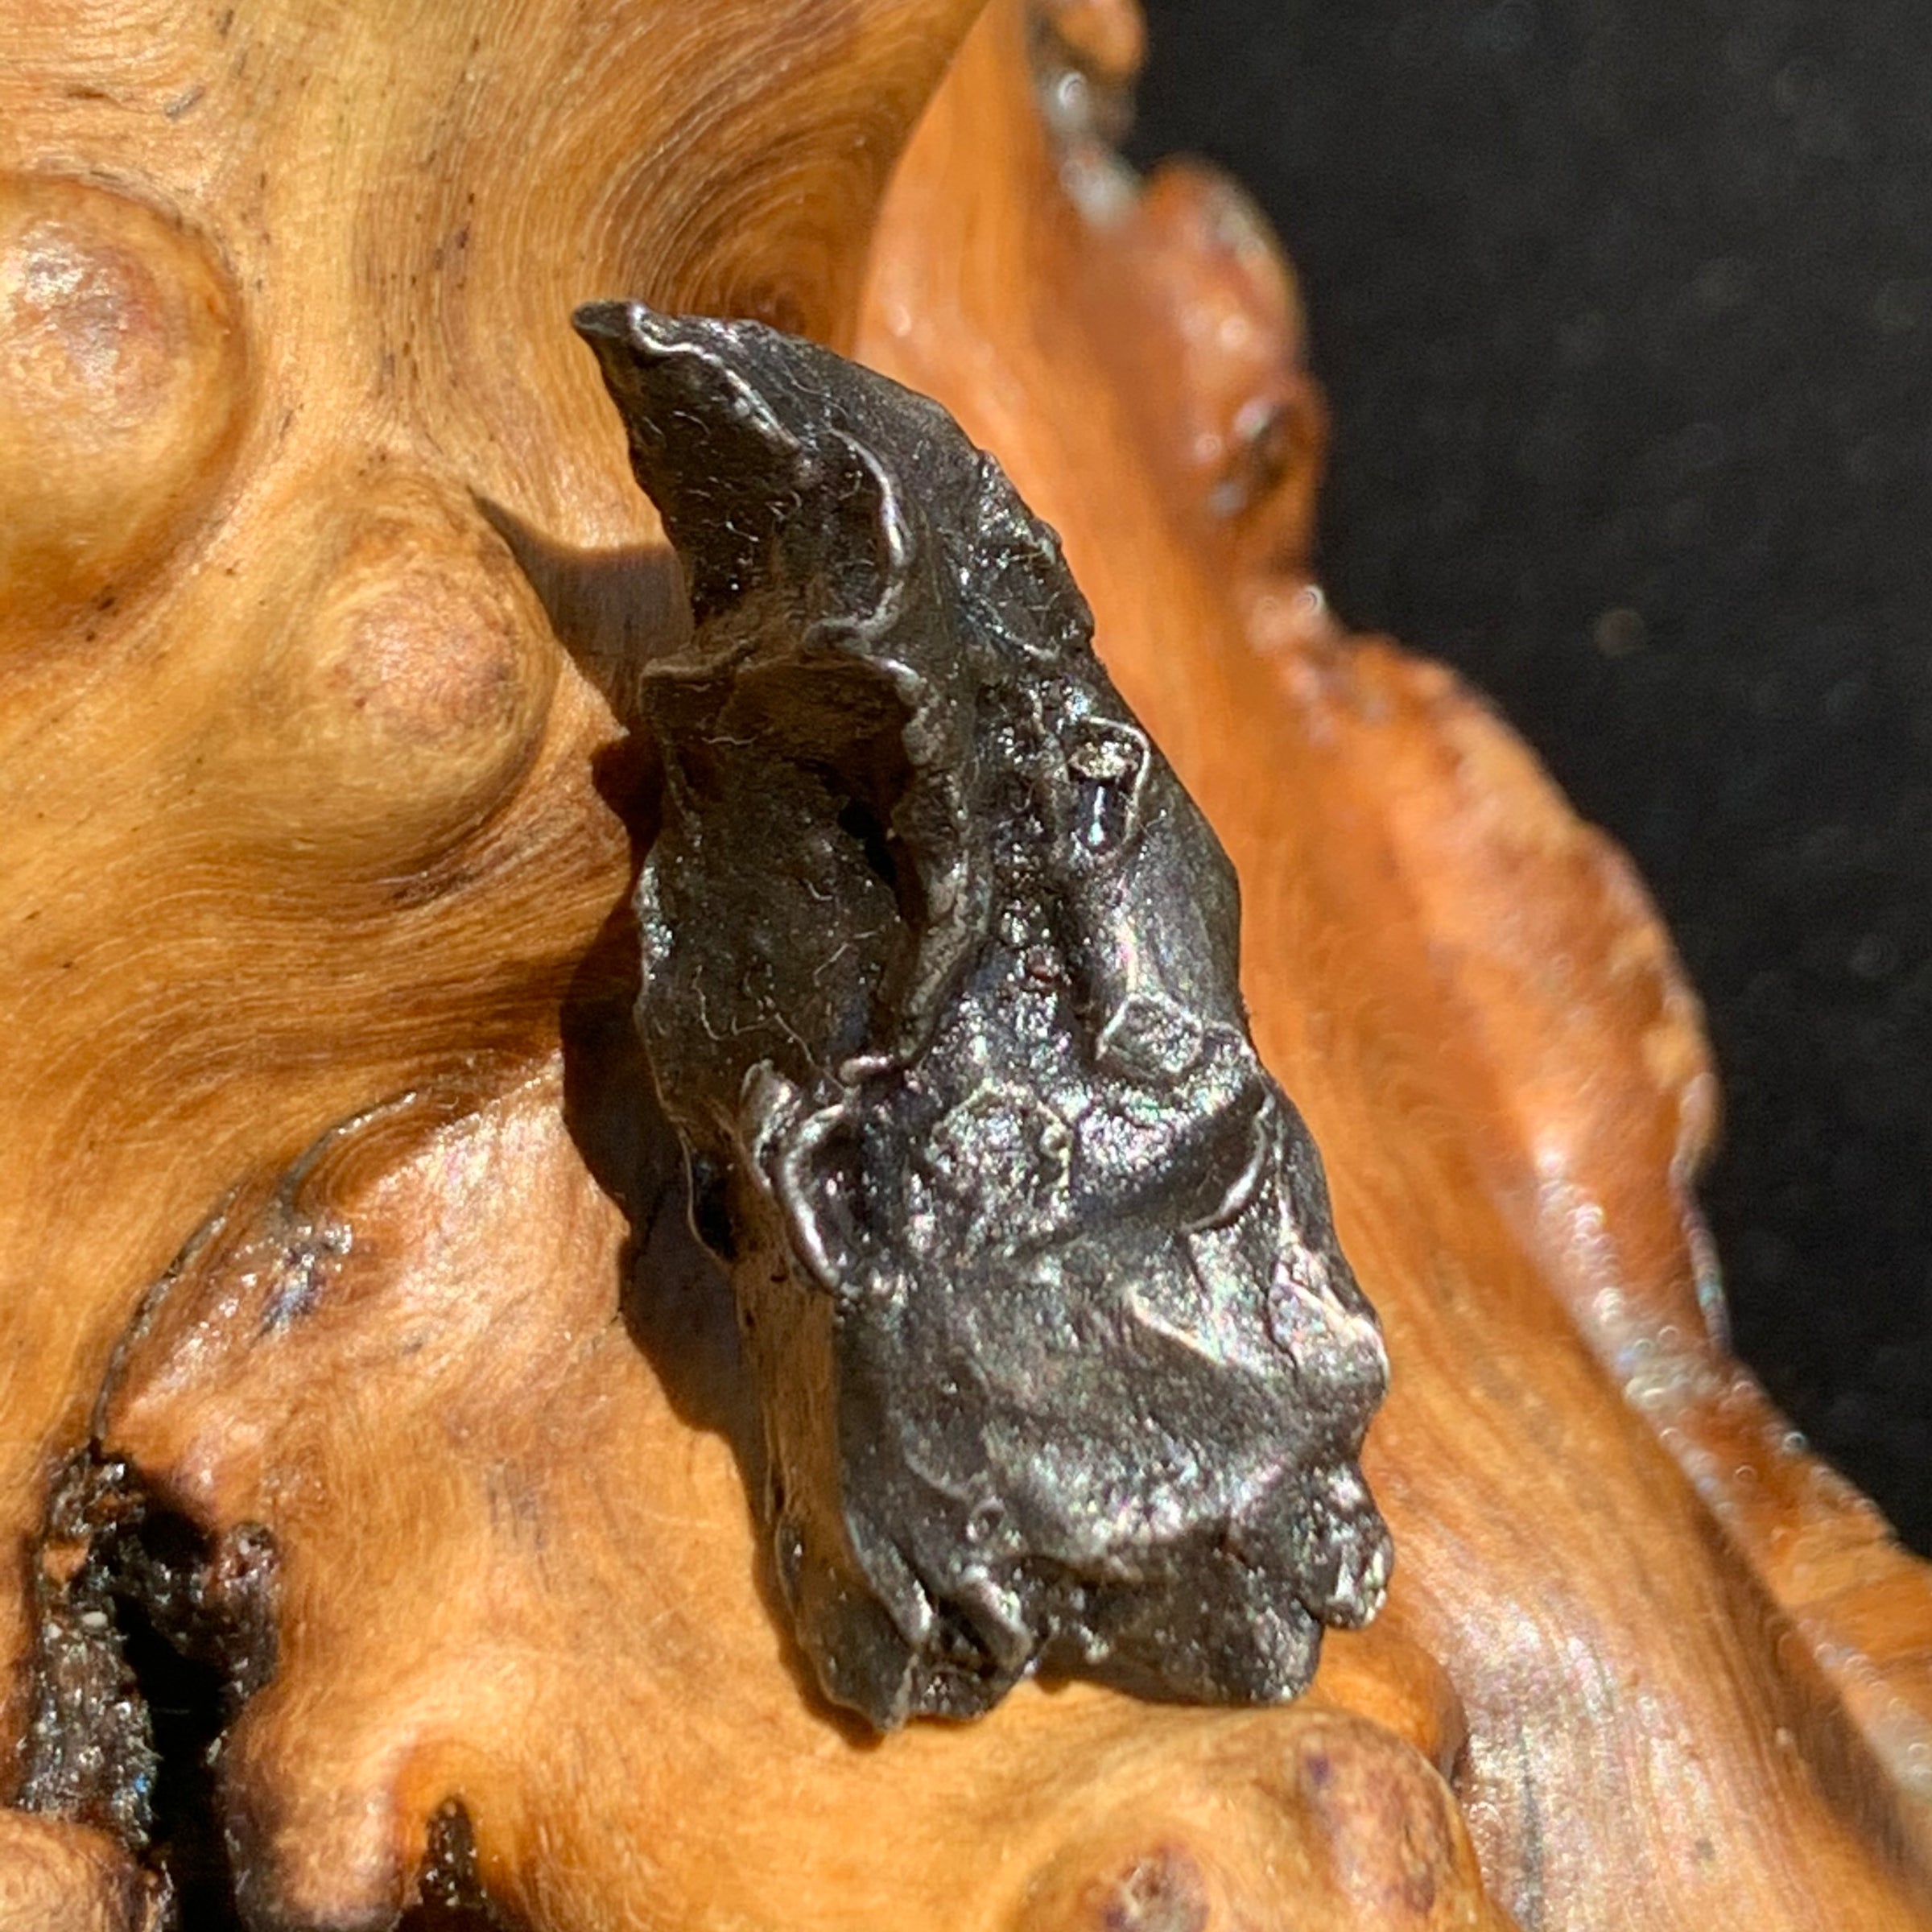 silver sikhote alin meteorite sitting on driftwood for display